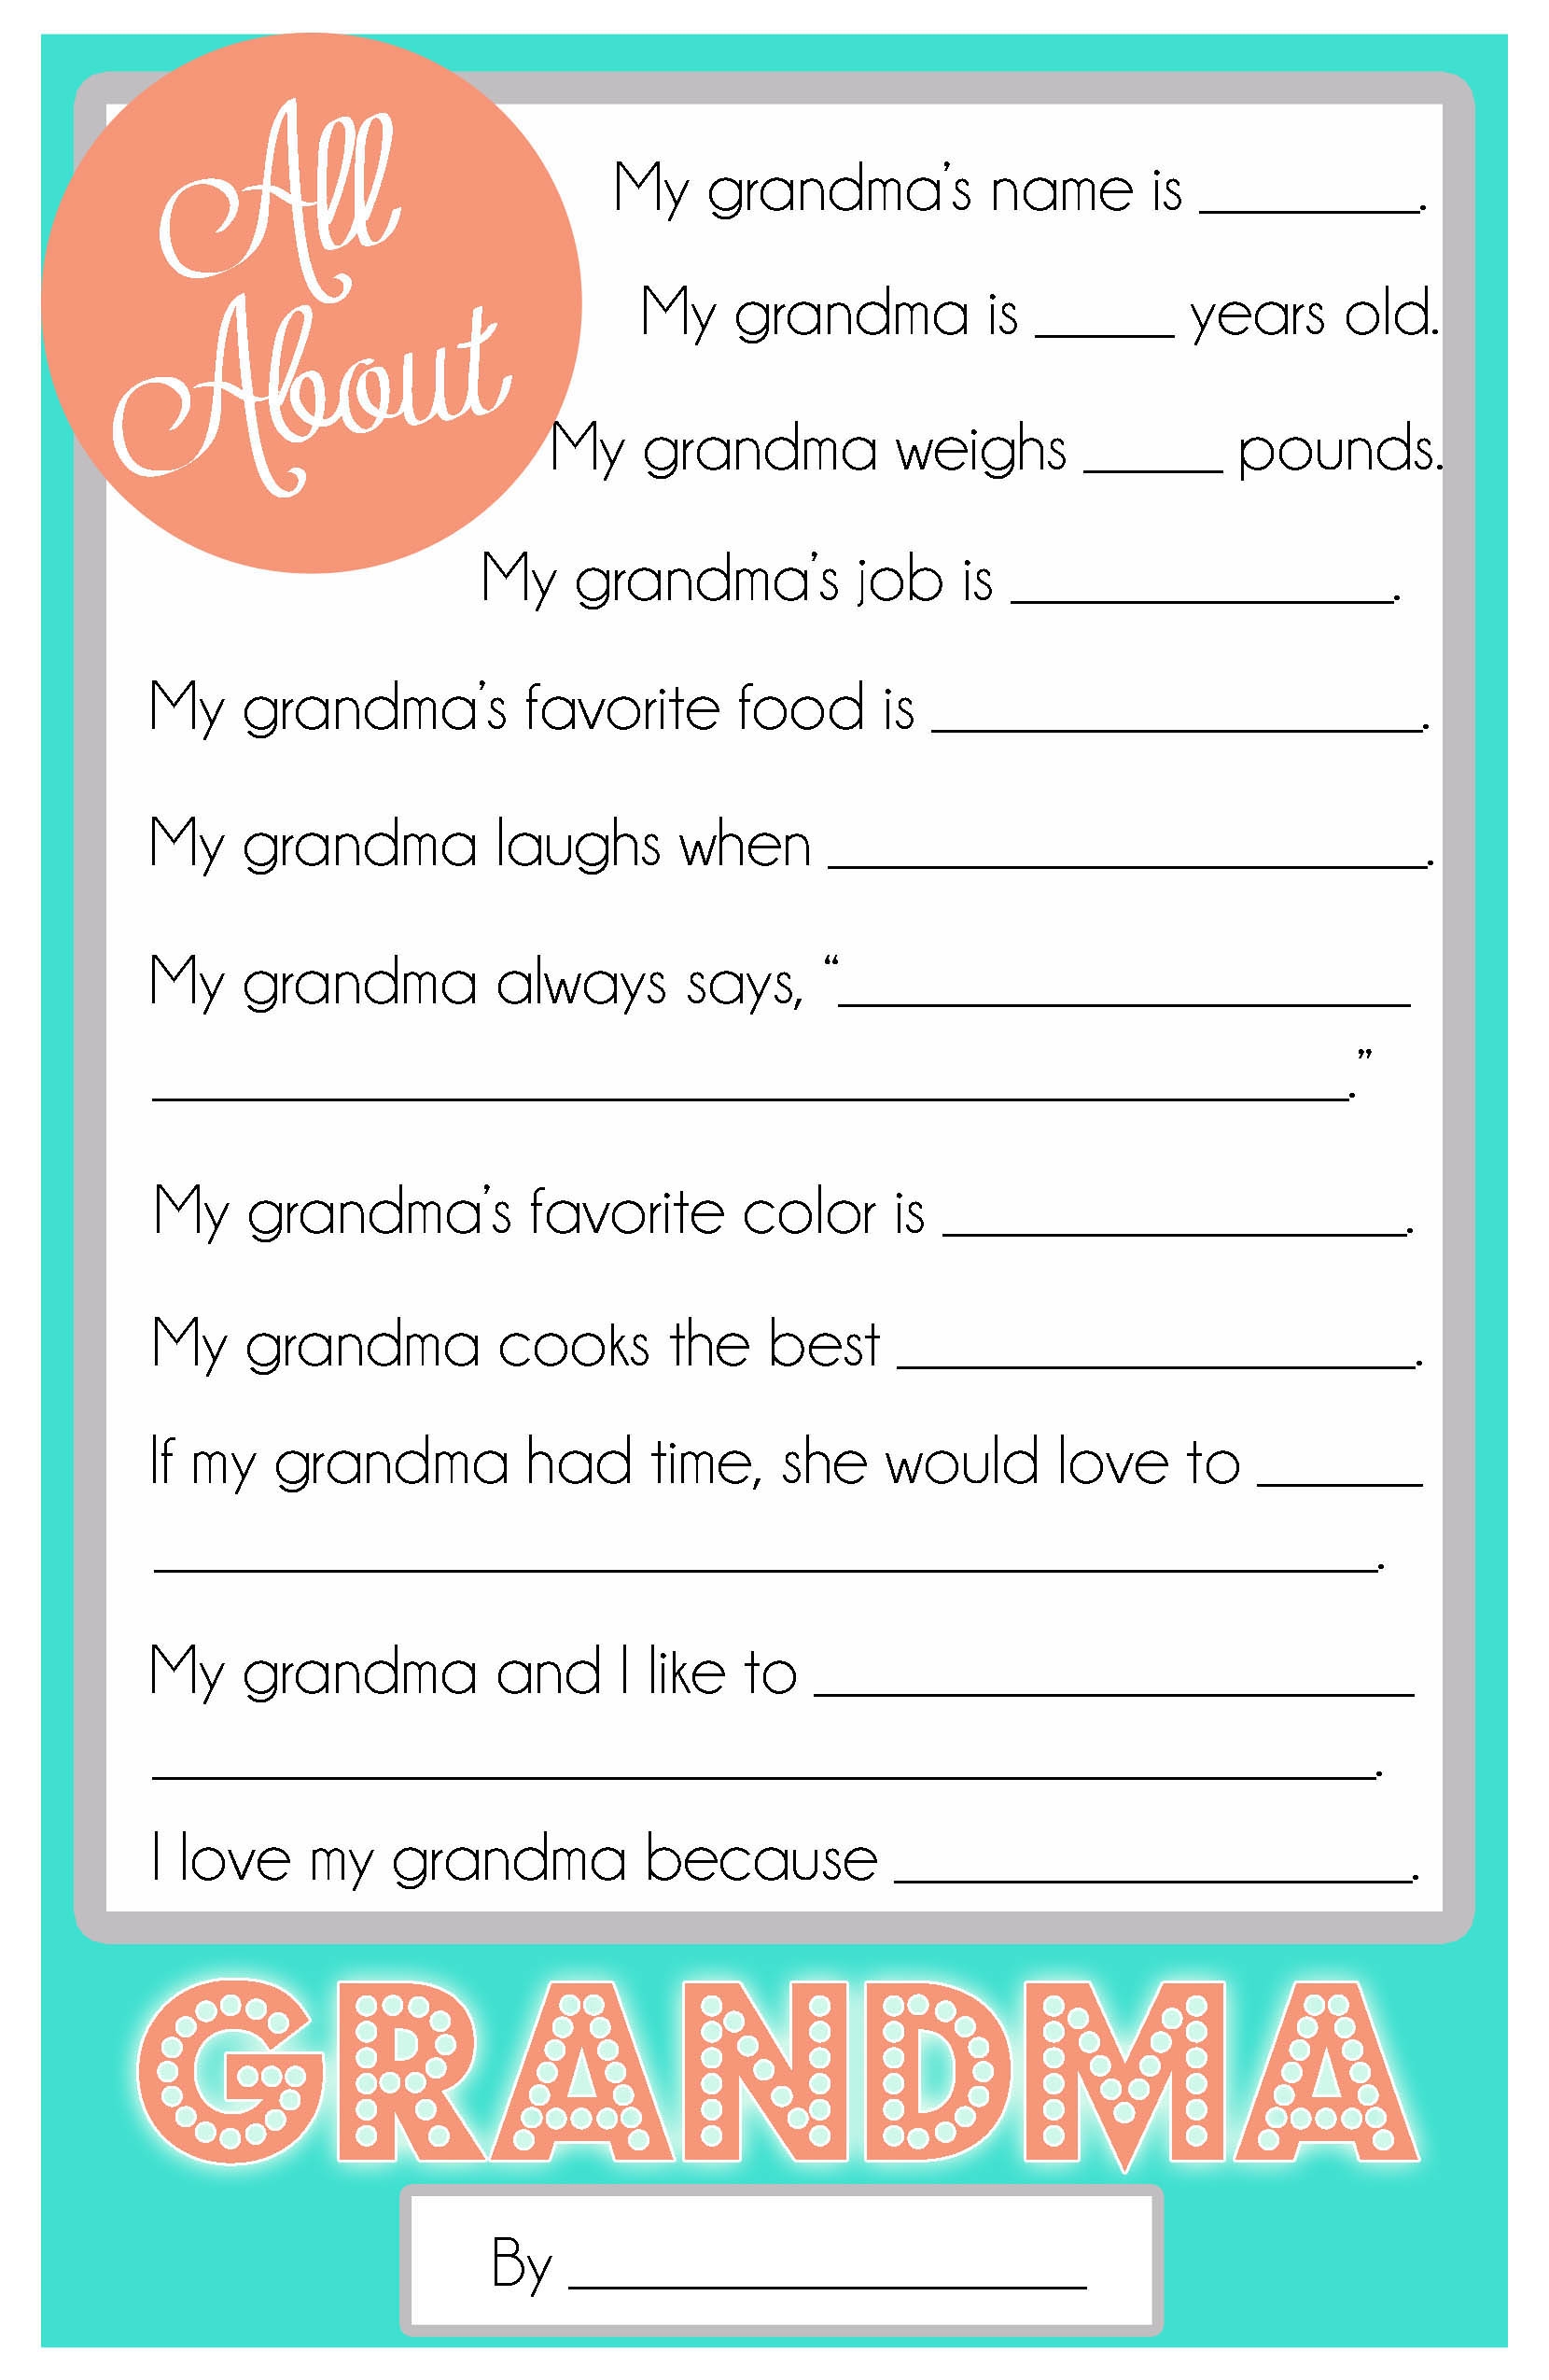 Mother s Day Questionnaire A FREE Printable For The Kids Cupcake Diaries